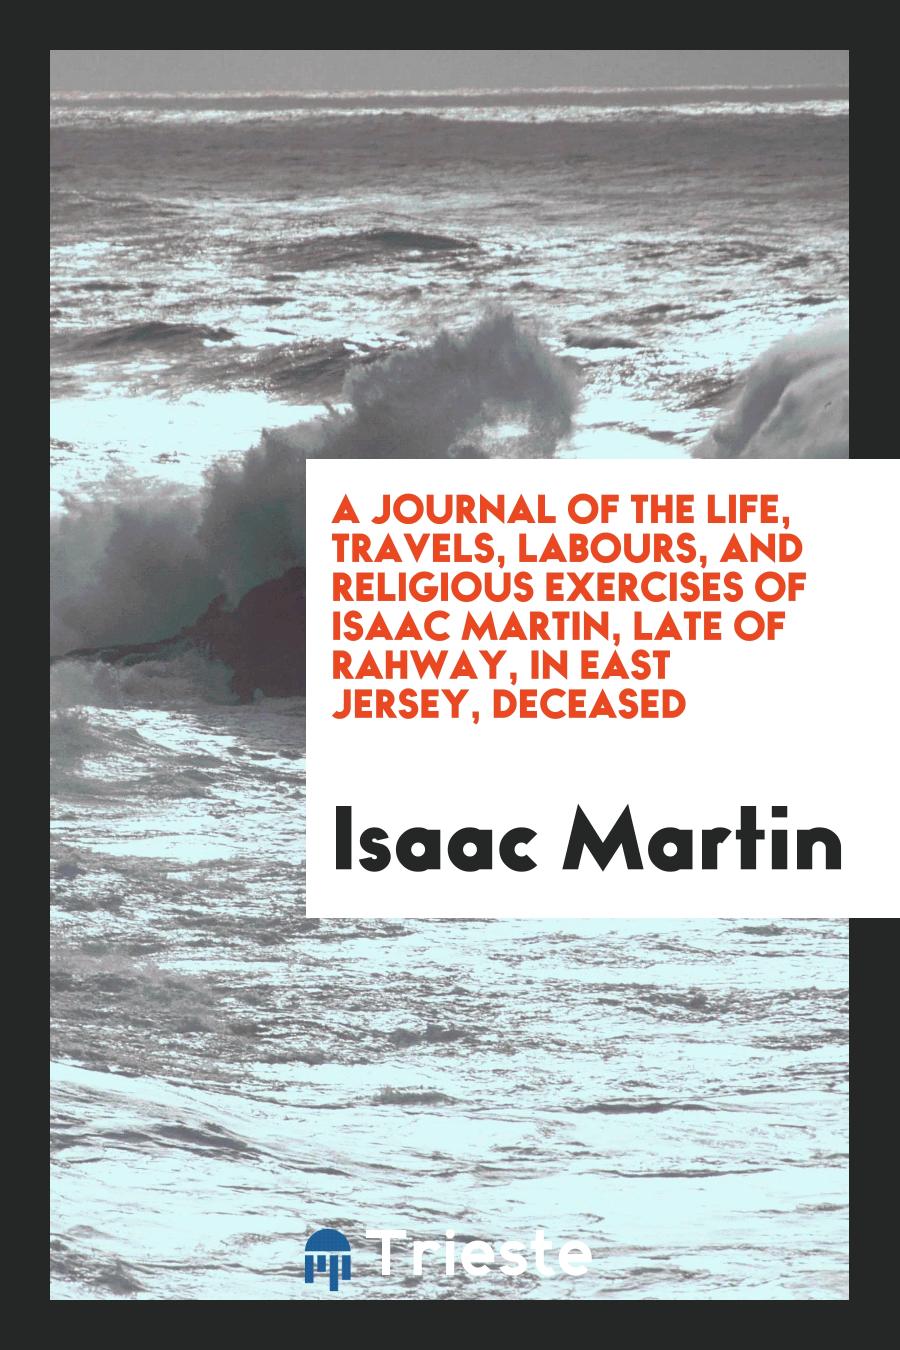 A Journal of the Life, Travels, Labours, and Religious Exercises of Isaac Martin, Late of Rahway, in East Jersey, Deceased